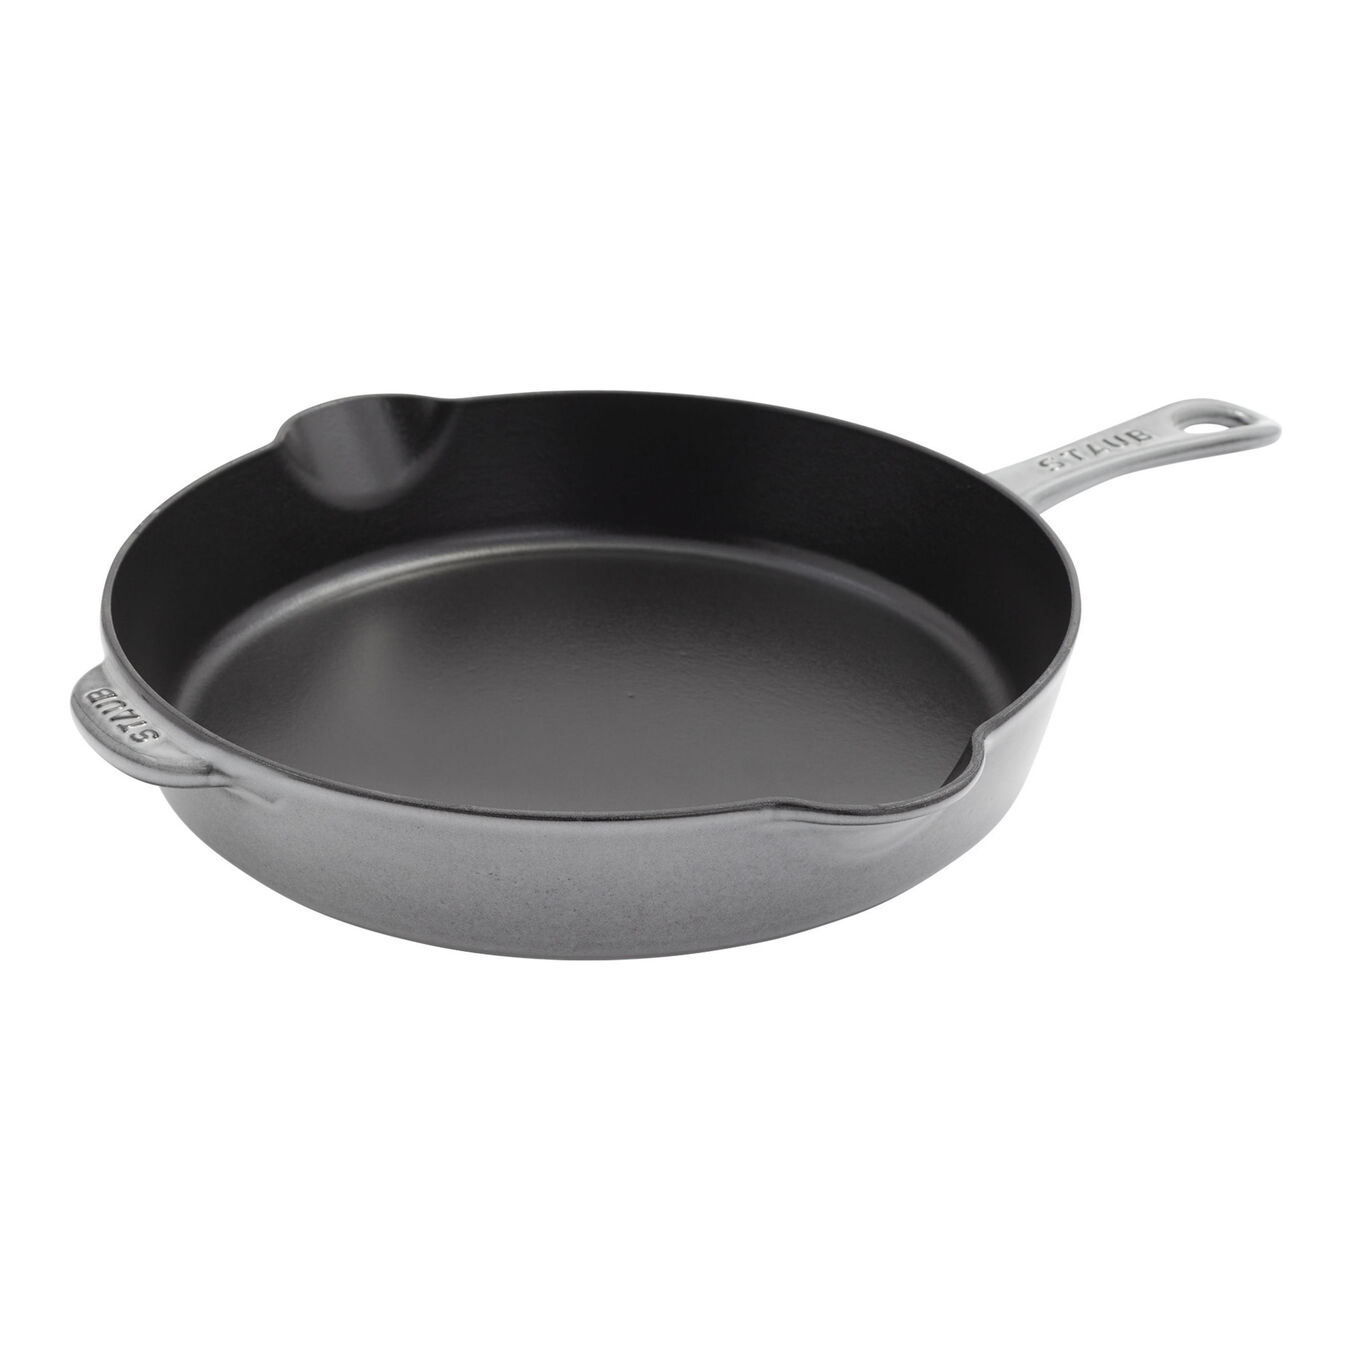 28 cm / 11 inch cast iron Frying pan, graphite-grey - Visual Imperfections,,large 1